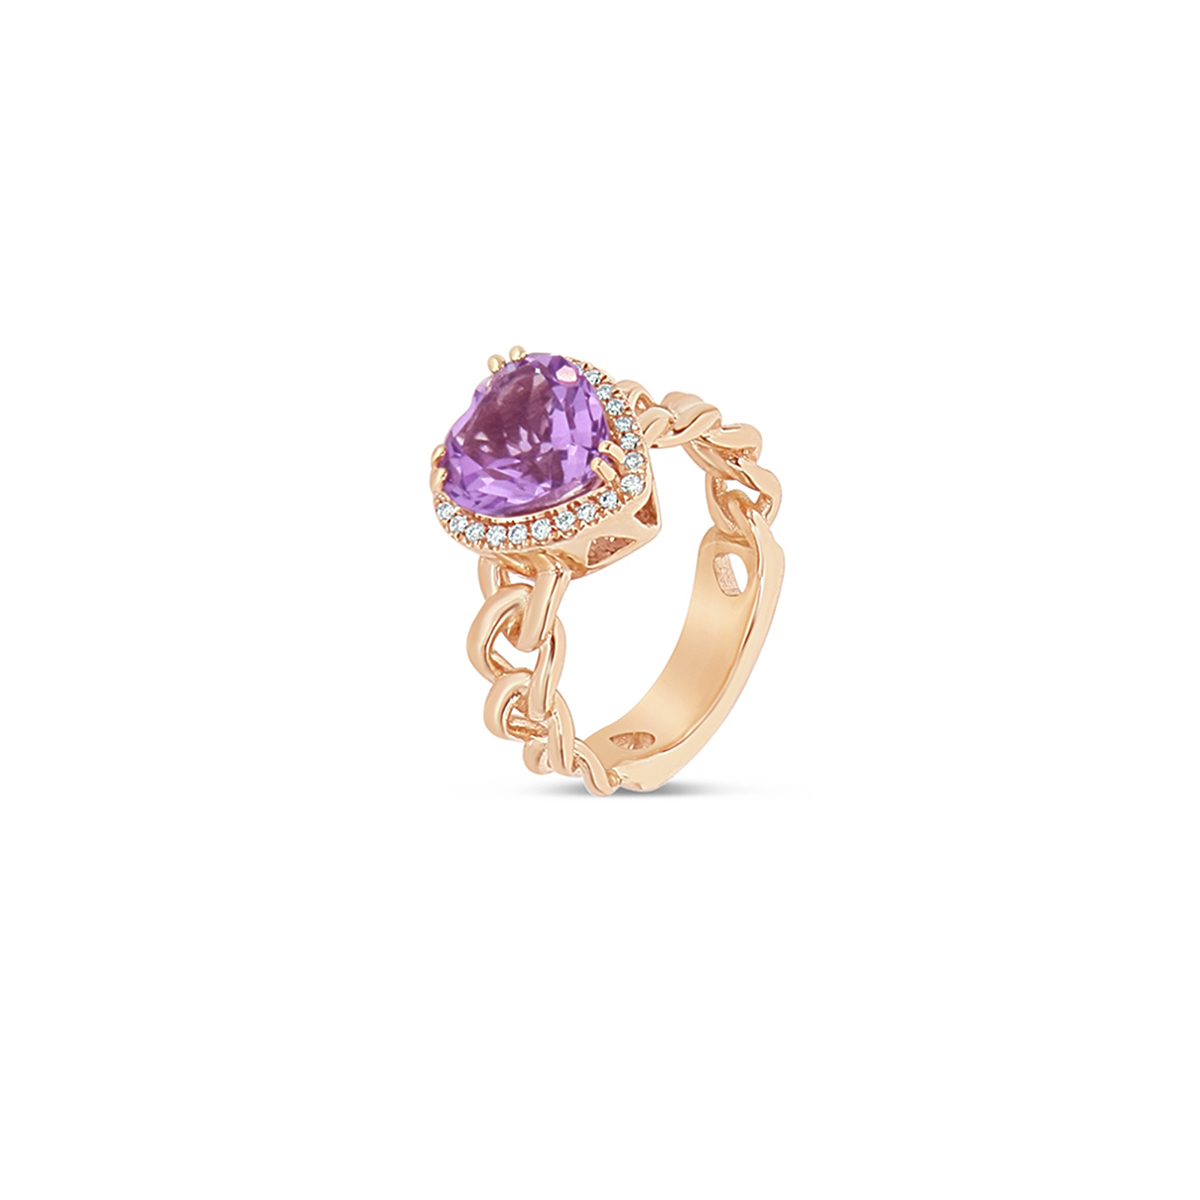 Heart Shaped Purple Amethyst Ring with White Diamonds